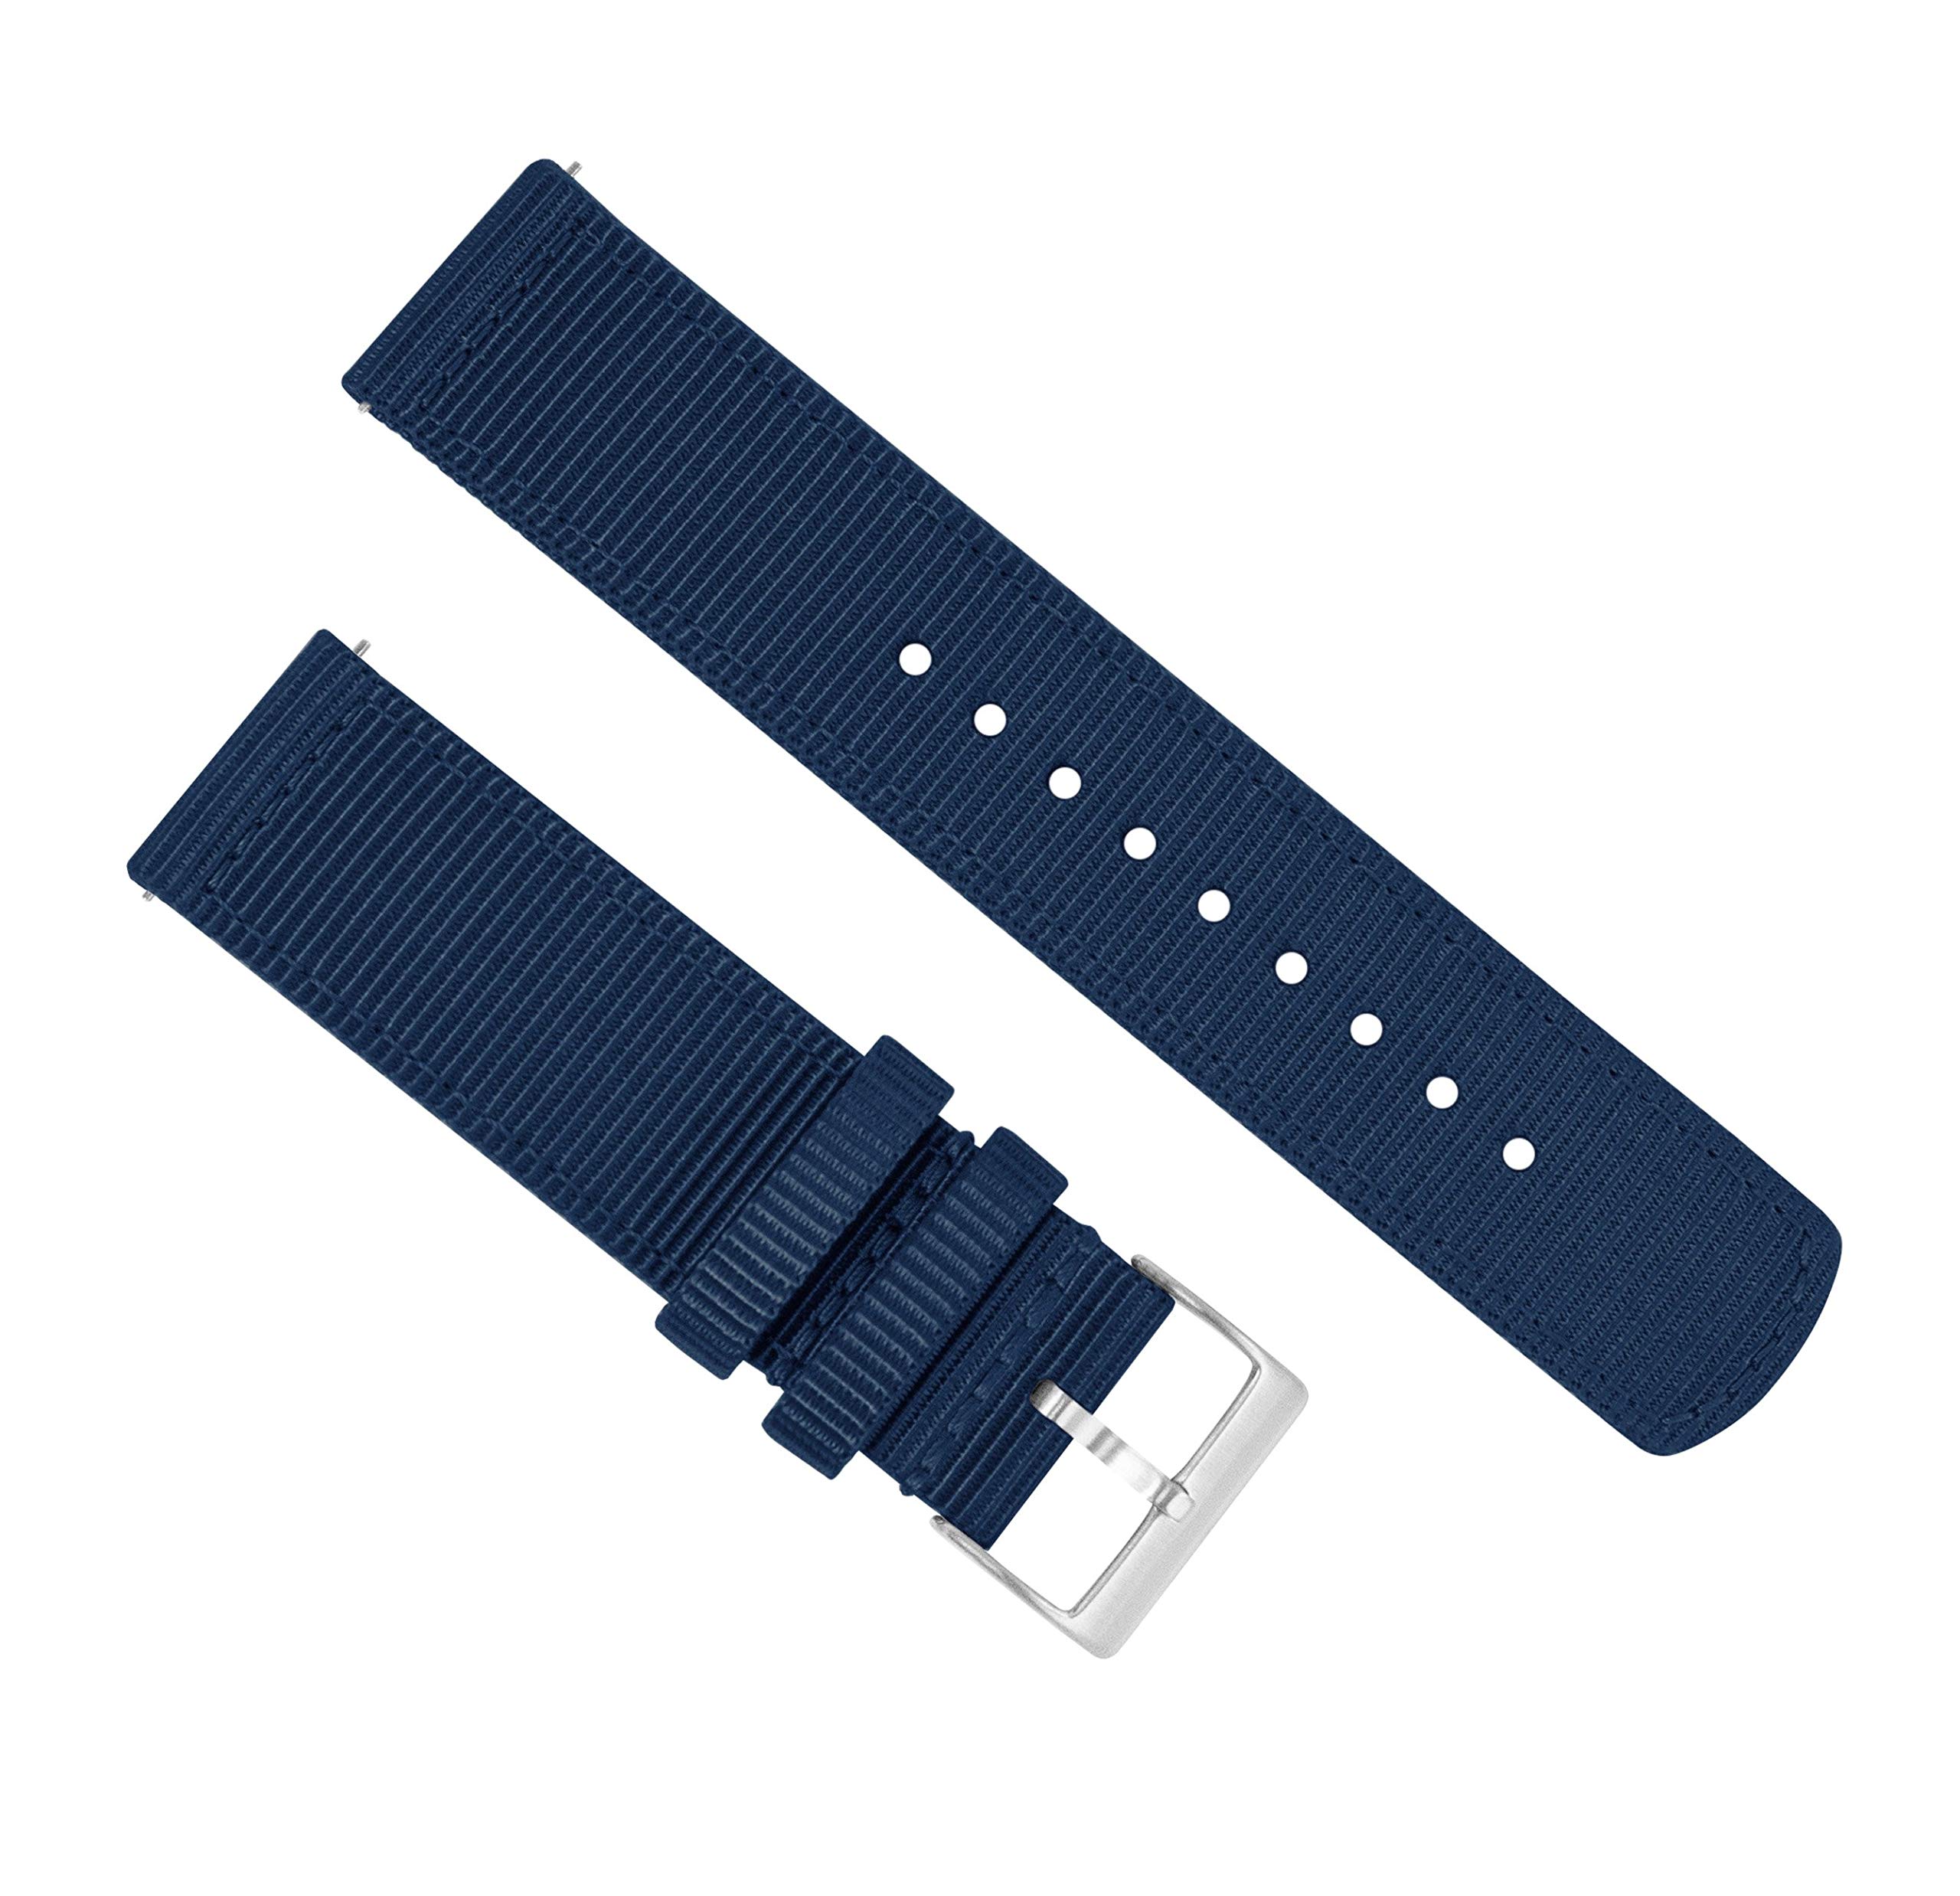 BARTON WATCH BANDS - Ballistic Nylon Two-piece NATO® Style Straps - Choice of Color & Width (18mm, 20mm, 22mm)